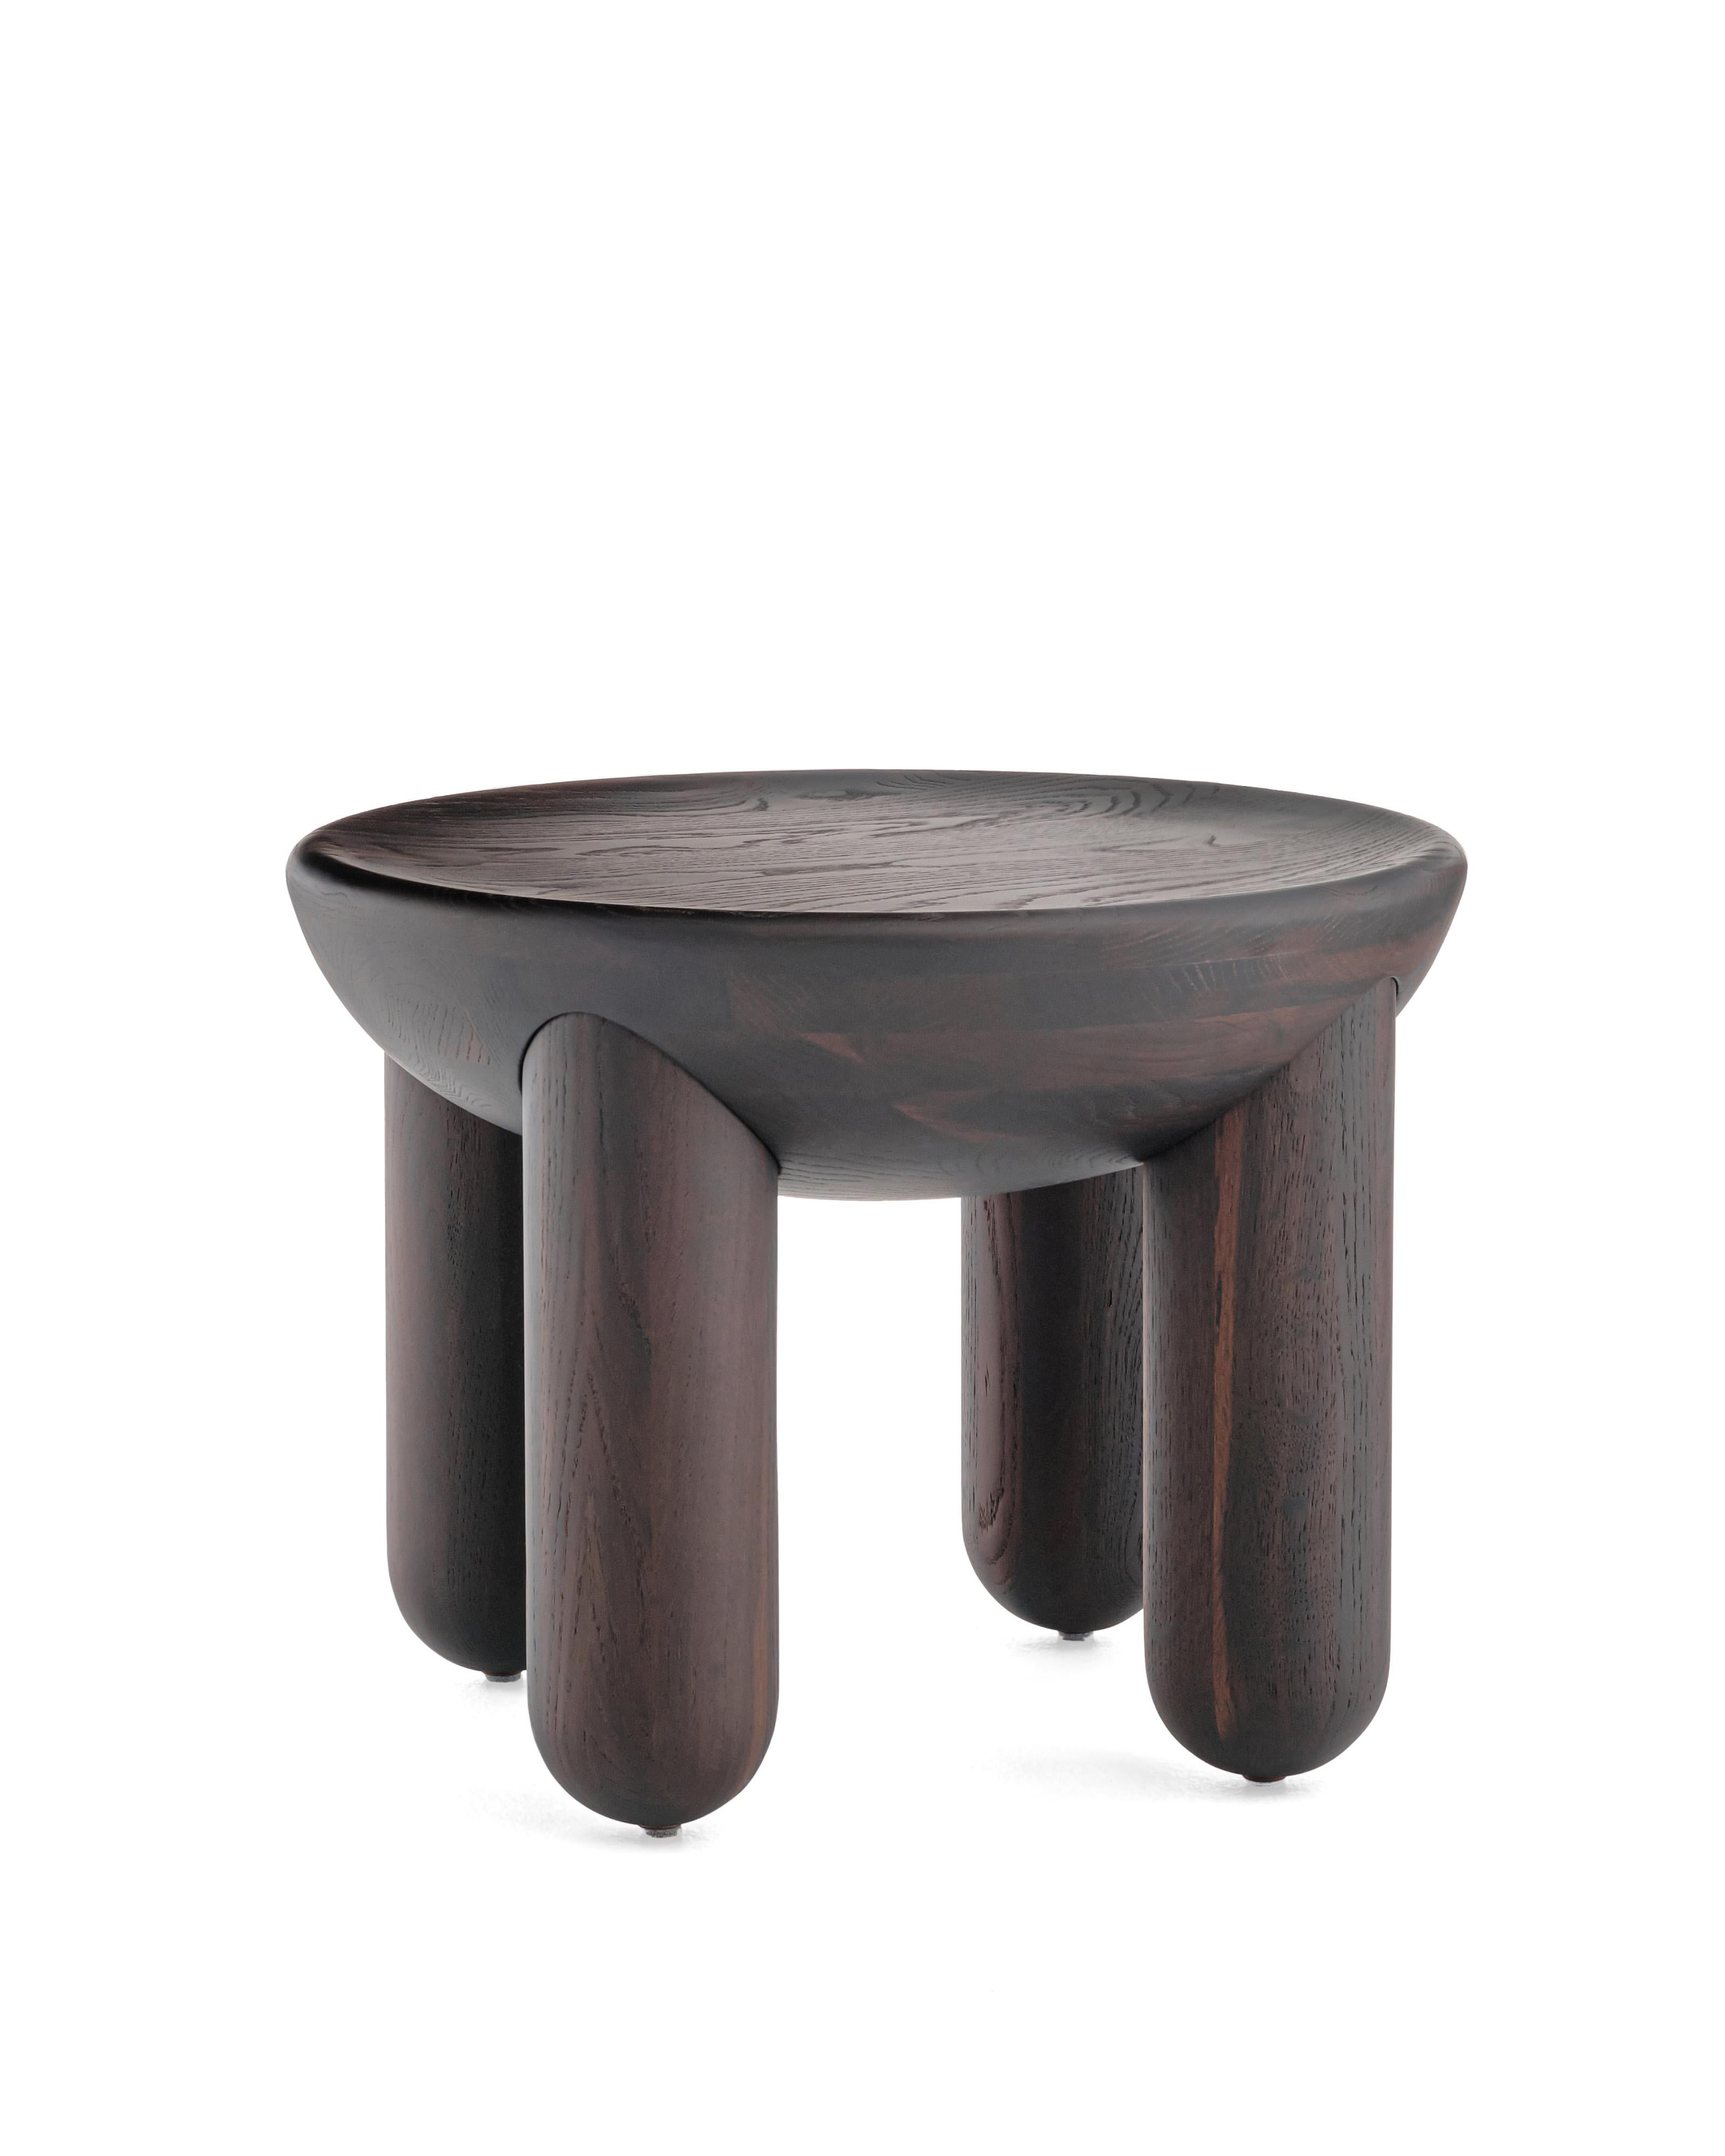 Modern Wooden Coffee Table Freyja 2 in Thermo Oak finish by Noom